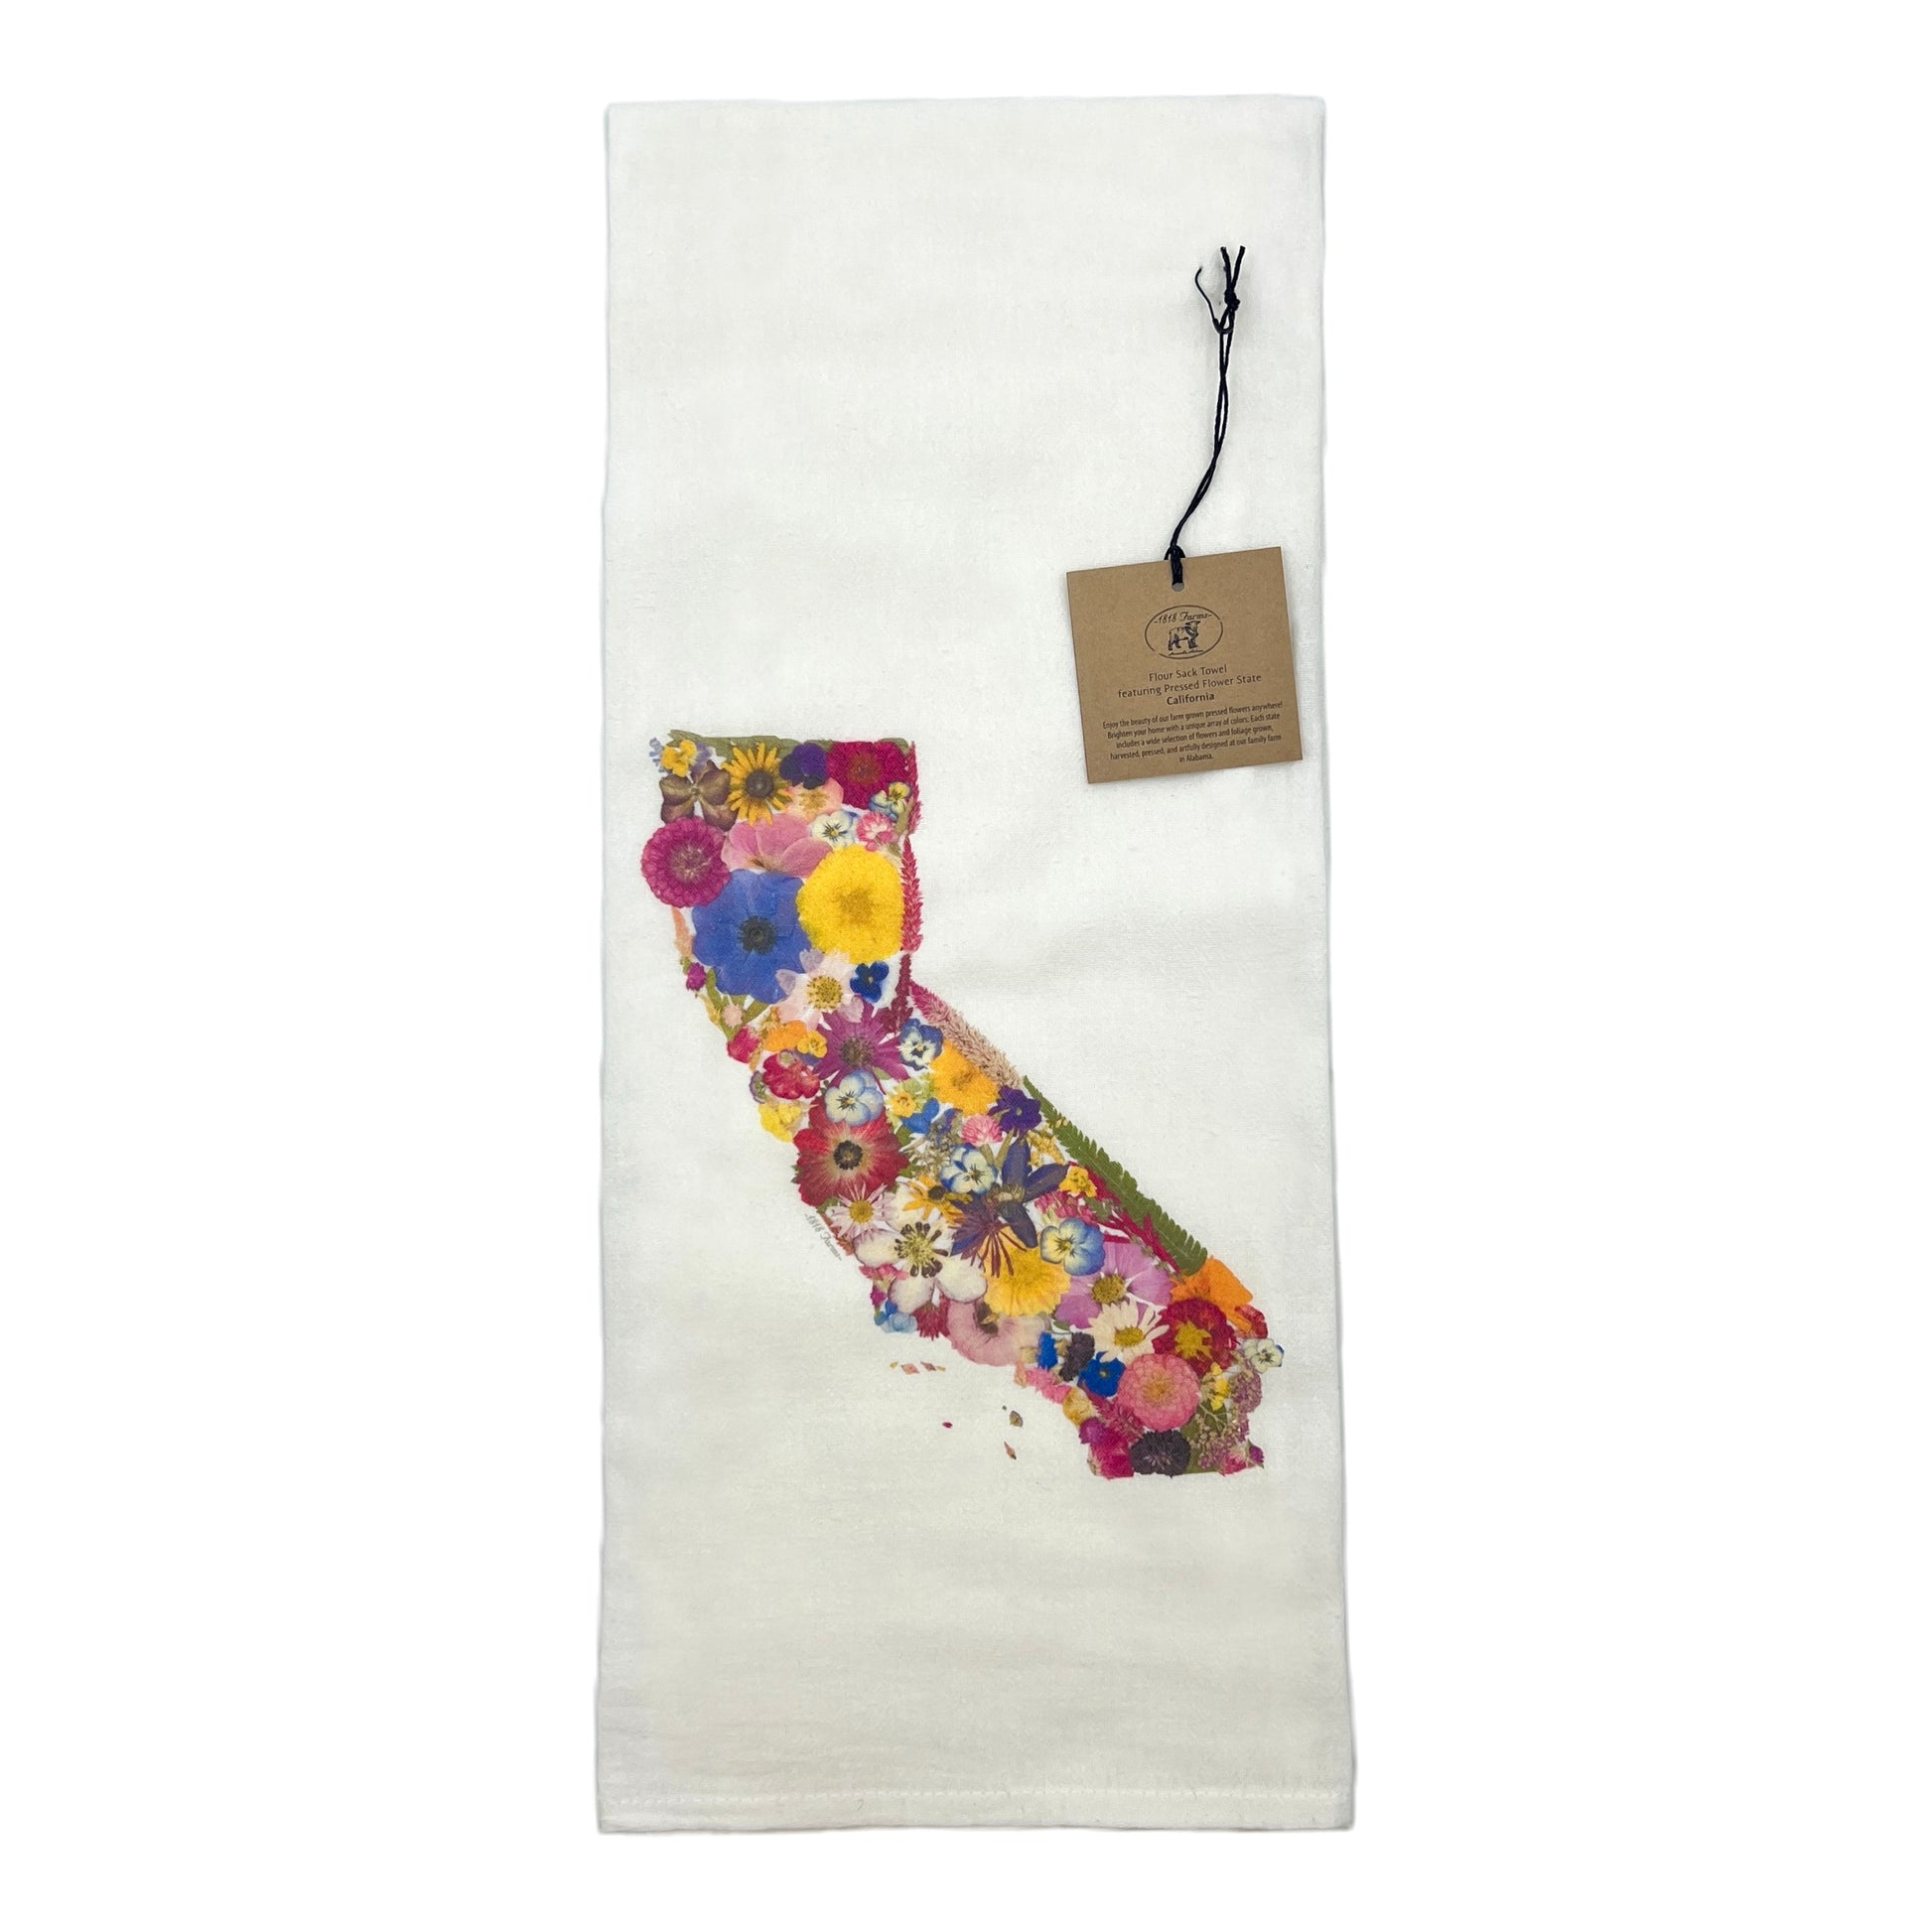 State Themed Flour Sack Towel  - "Where I Bloom" Collection Towel 1818 Farms California  